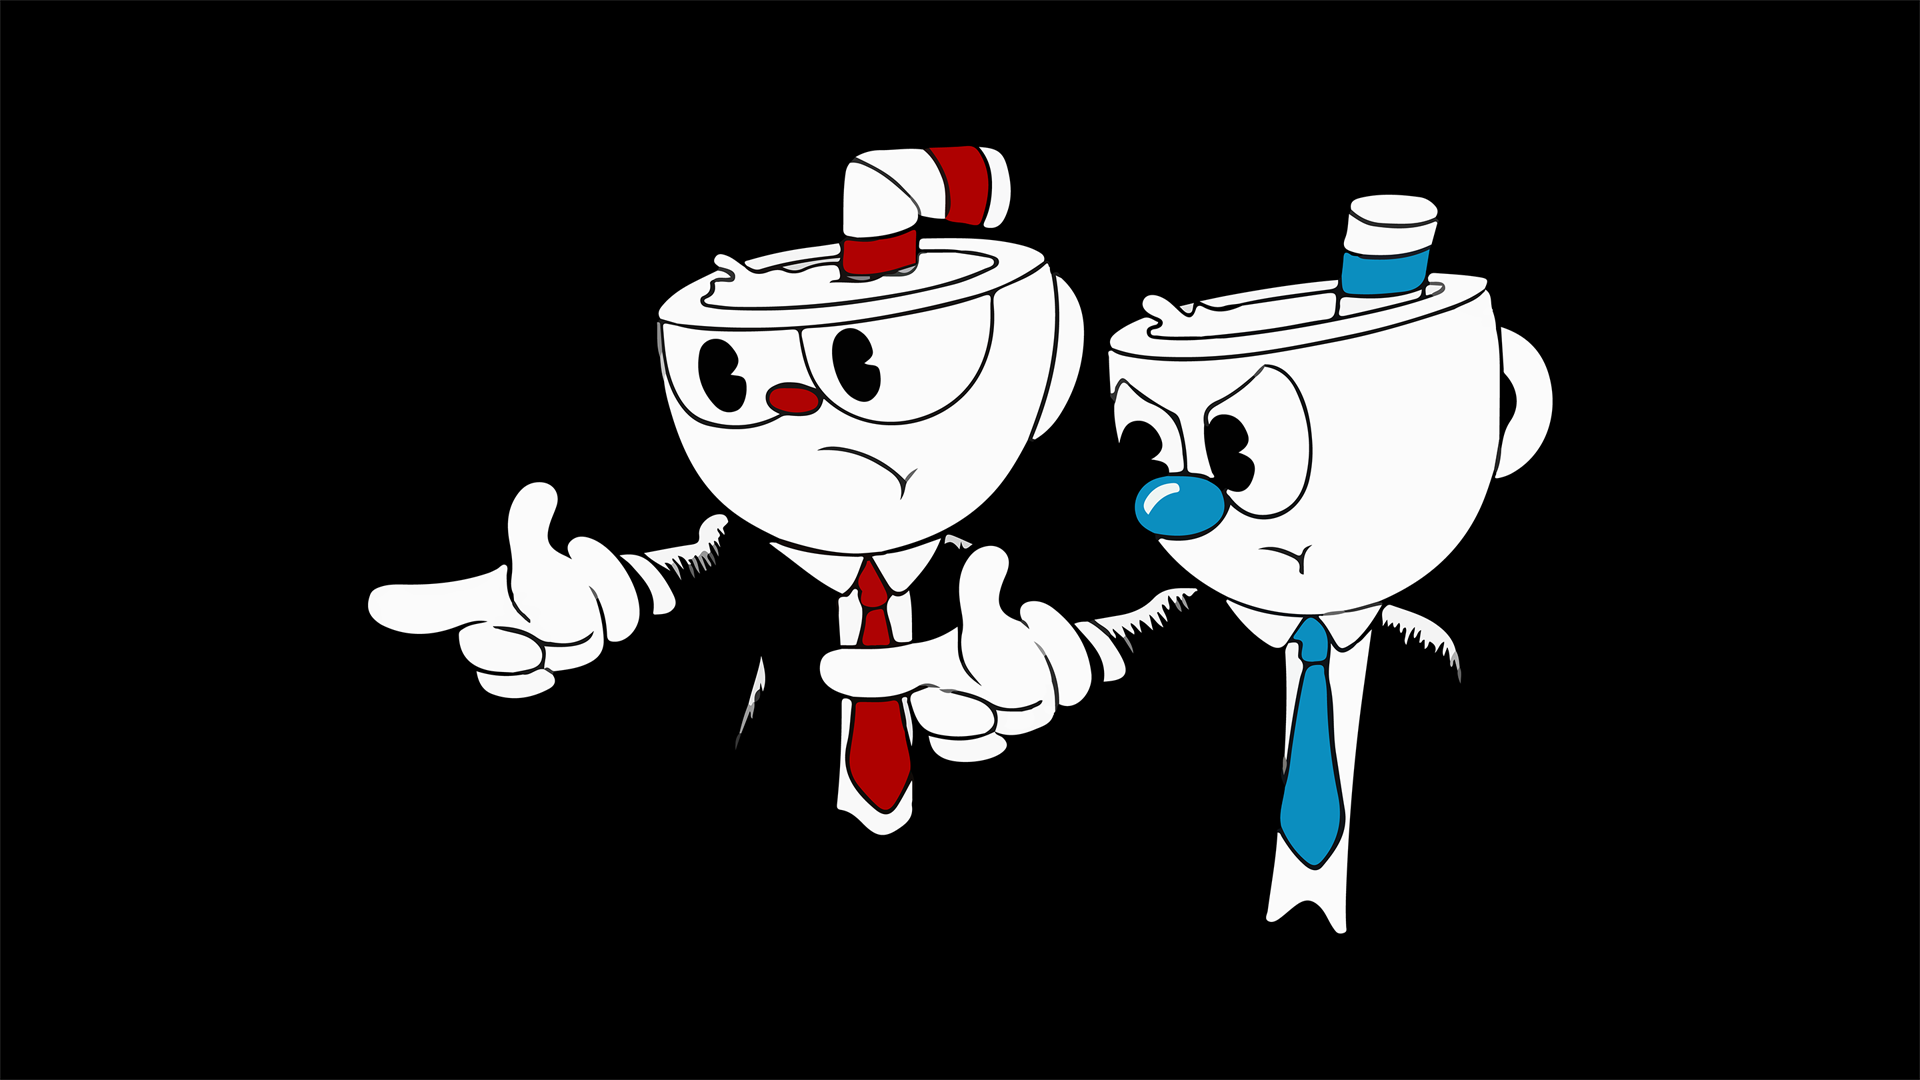 General 1920x1080 Cuphead (Video Game) Pulp Fiction humor crossover mash-ups black background black video game characters